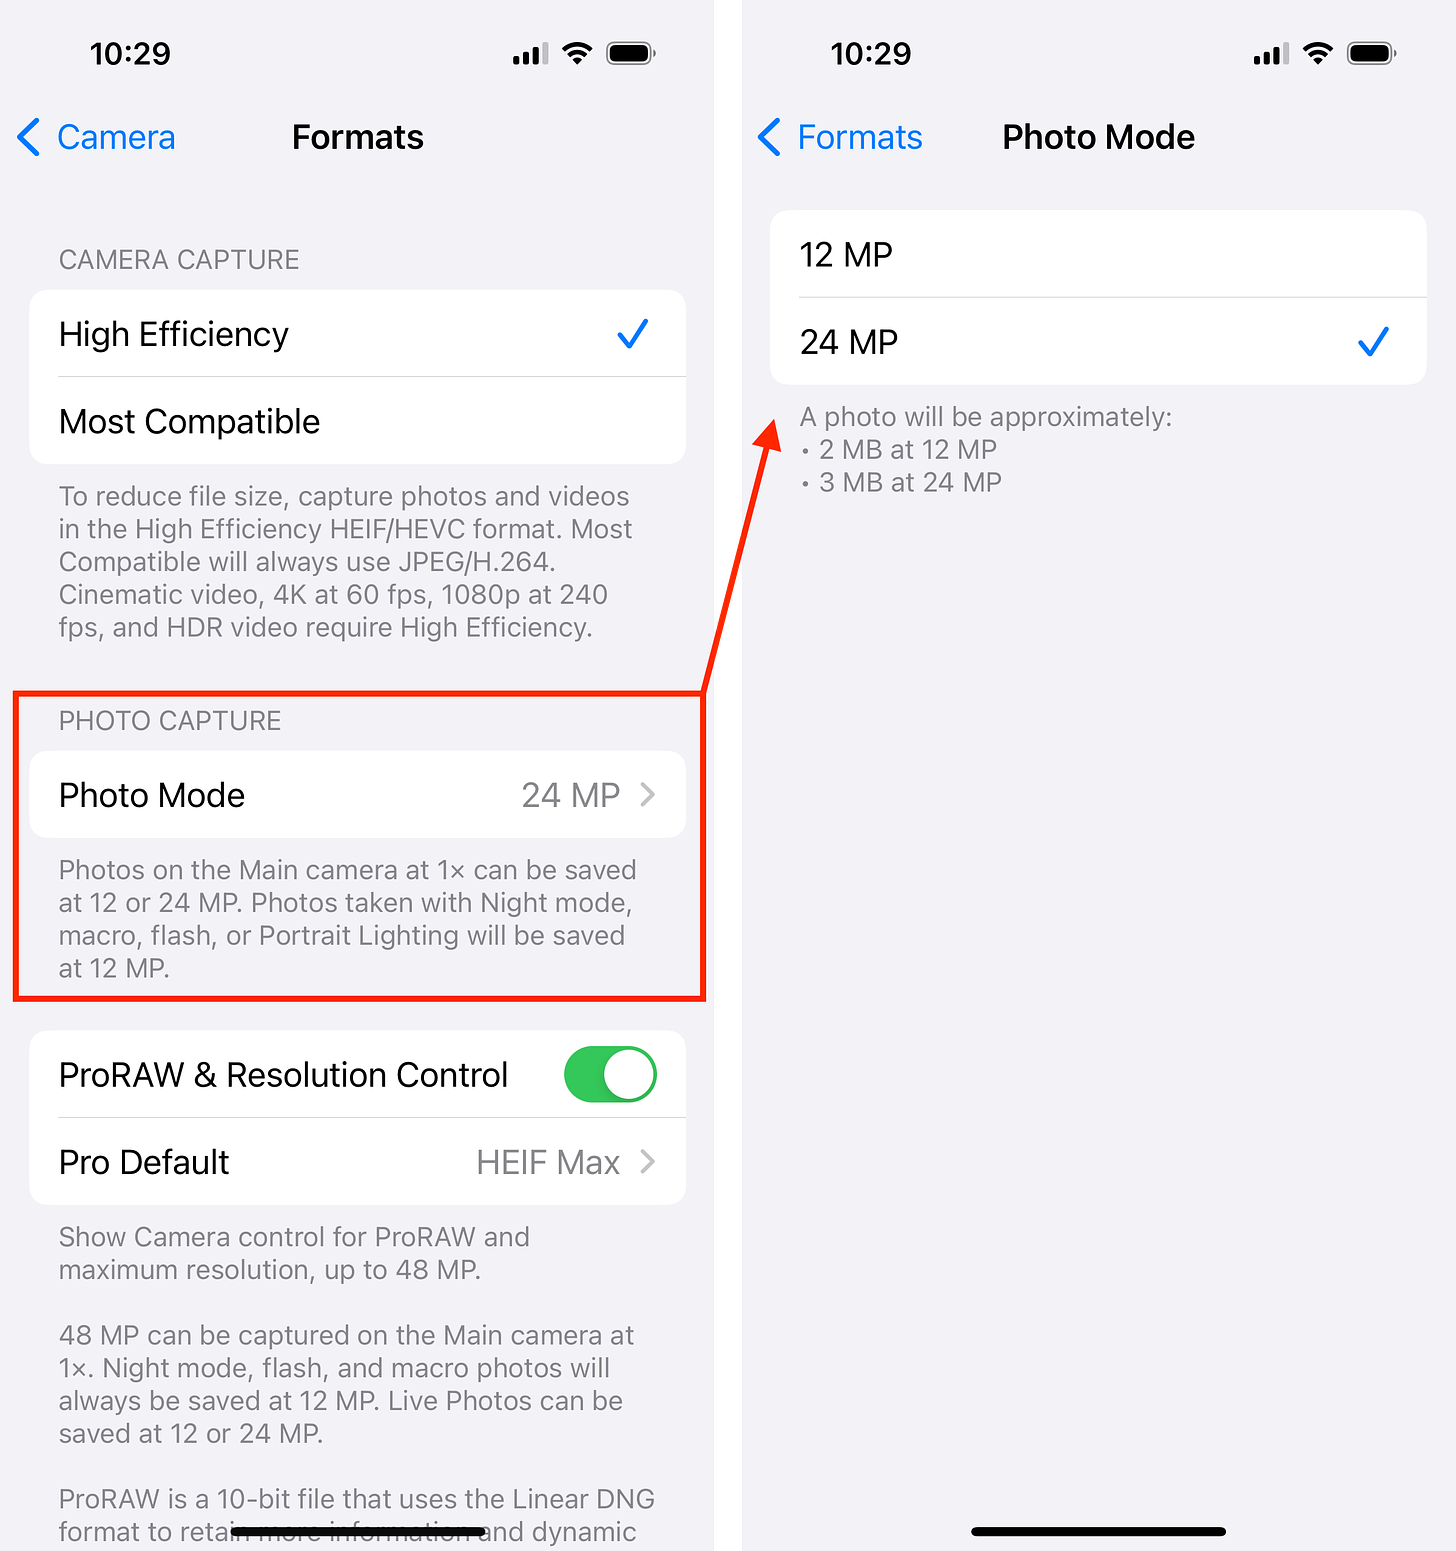 Two iPhone Camera Settings screens, showing the ability to choose a Photo Capture mode of either 12 MP or 24 MP